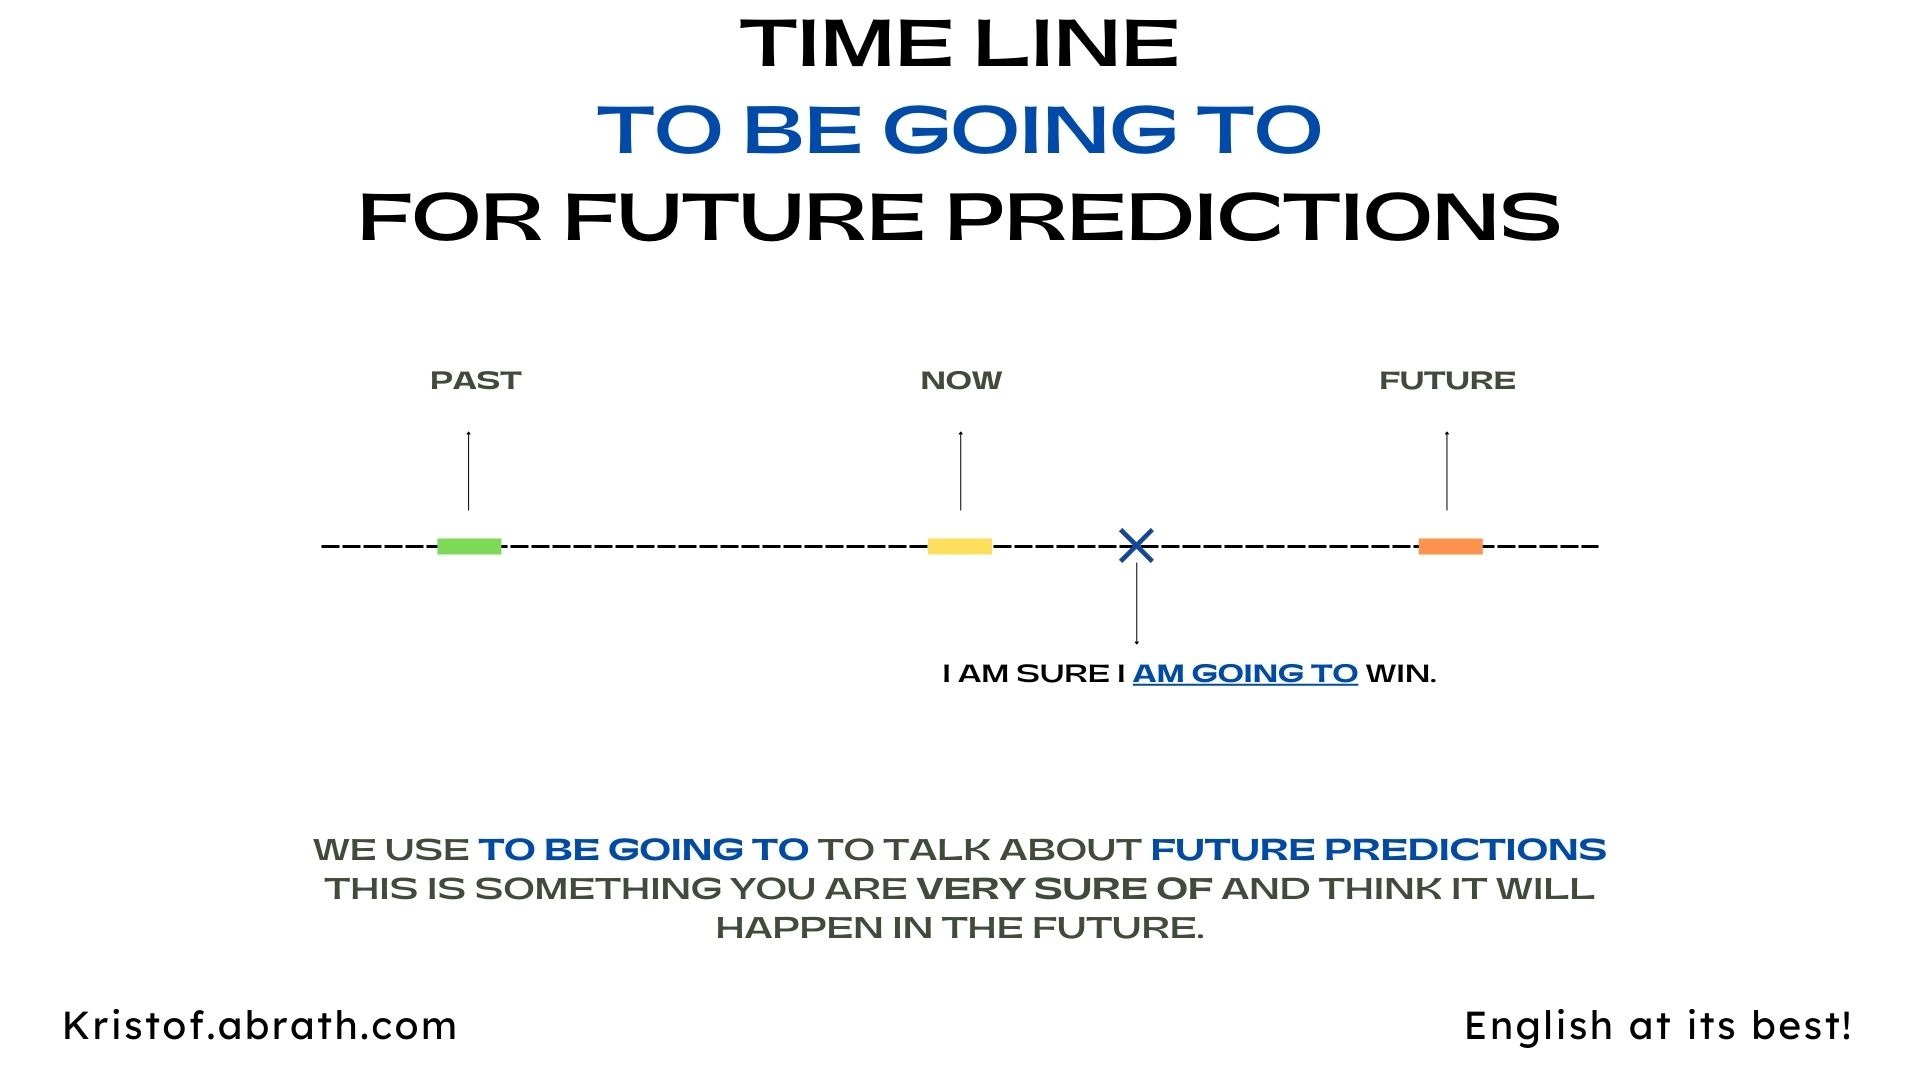 To be going to for future predictions time line